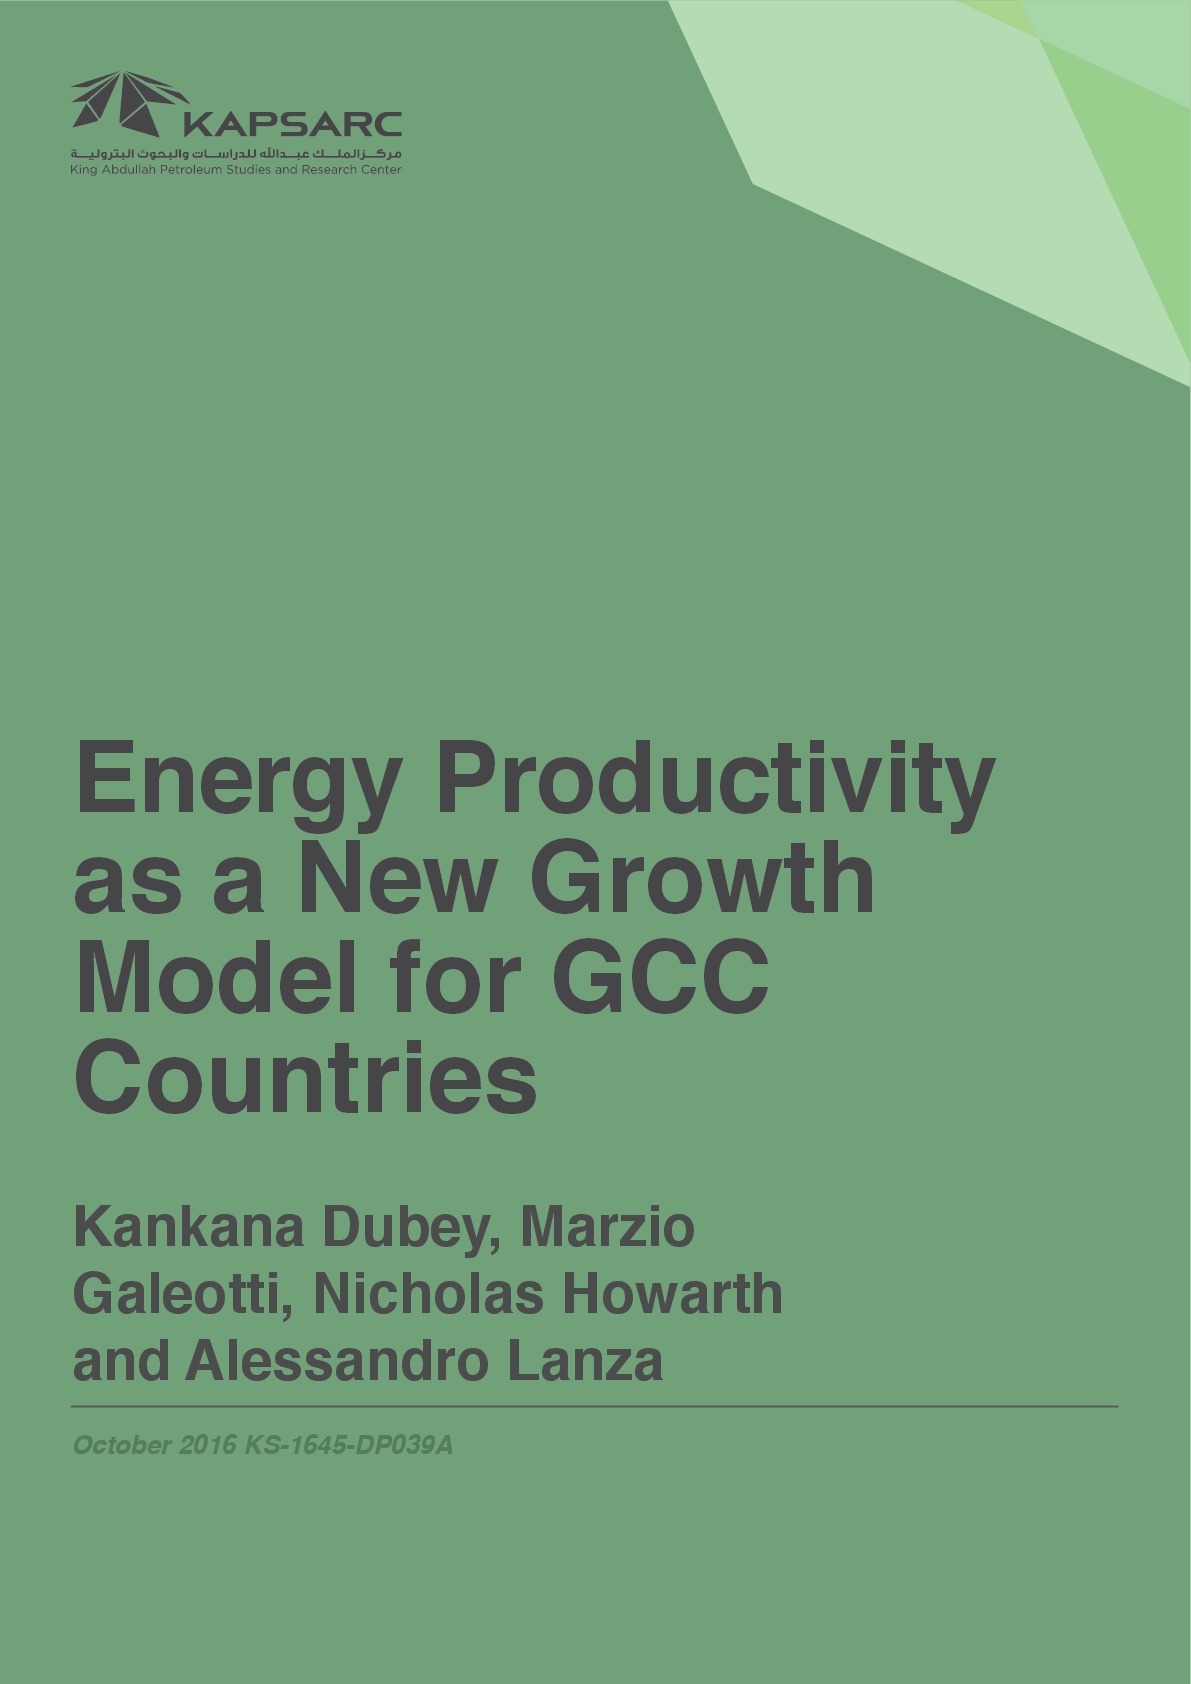 Energy Productivity as a New Growth Model for GCC Countries